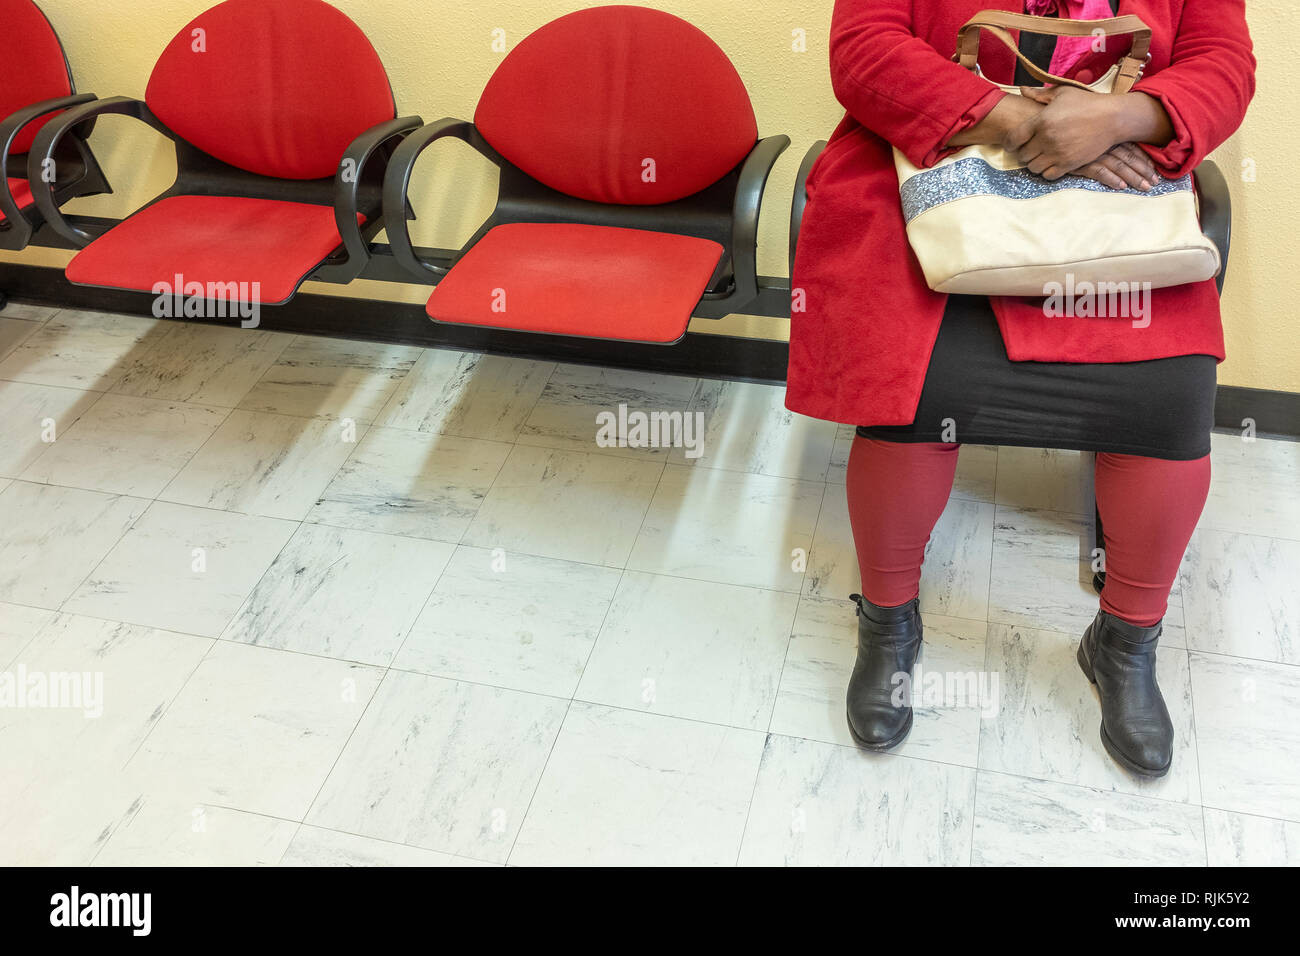 Health care: view of feets of a woman in red in waiting room for doctor's appointment Stock Photo